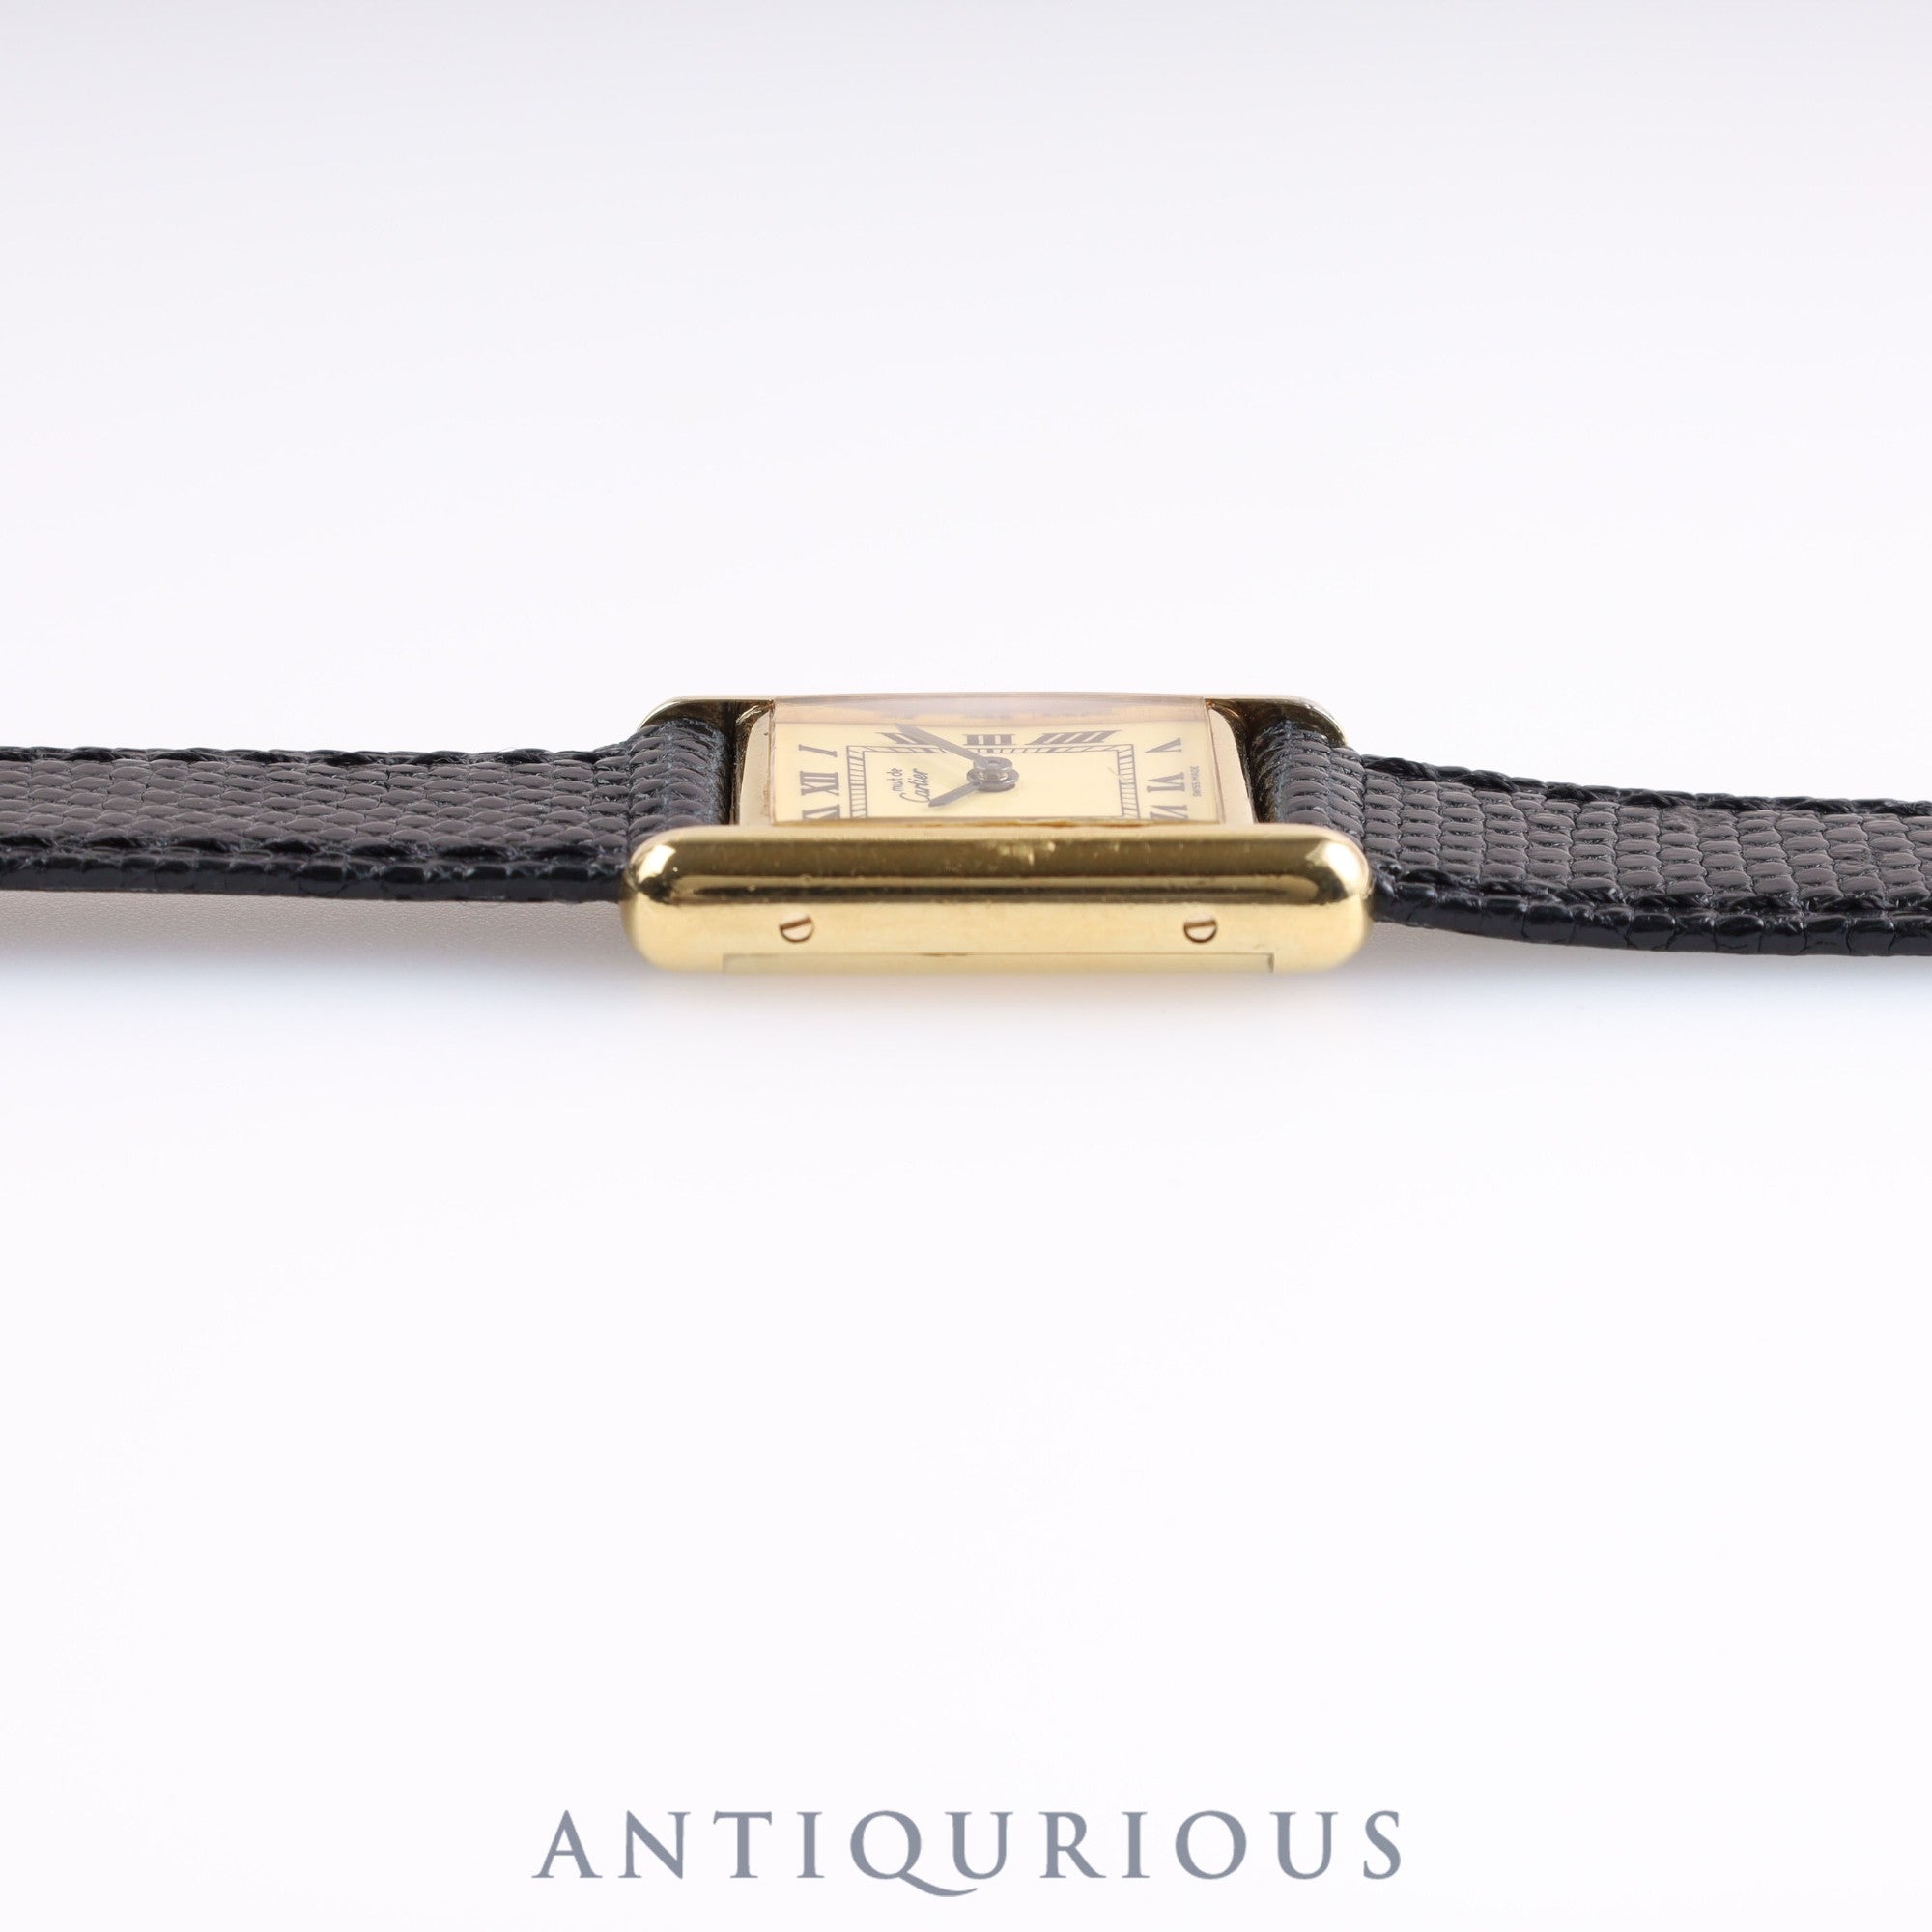 CARTIER Must Tank SM Manual winding SV925 Leather Genuine buckle (GP) Ivory Roman dial Cartier boutique complete service